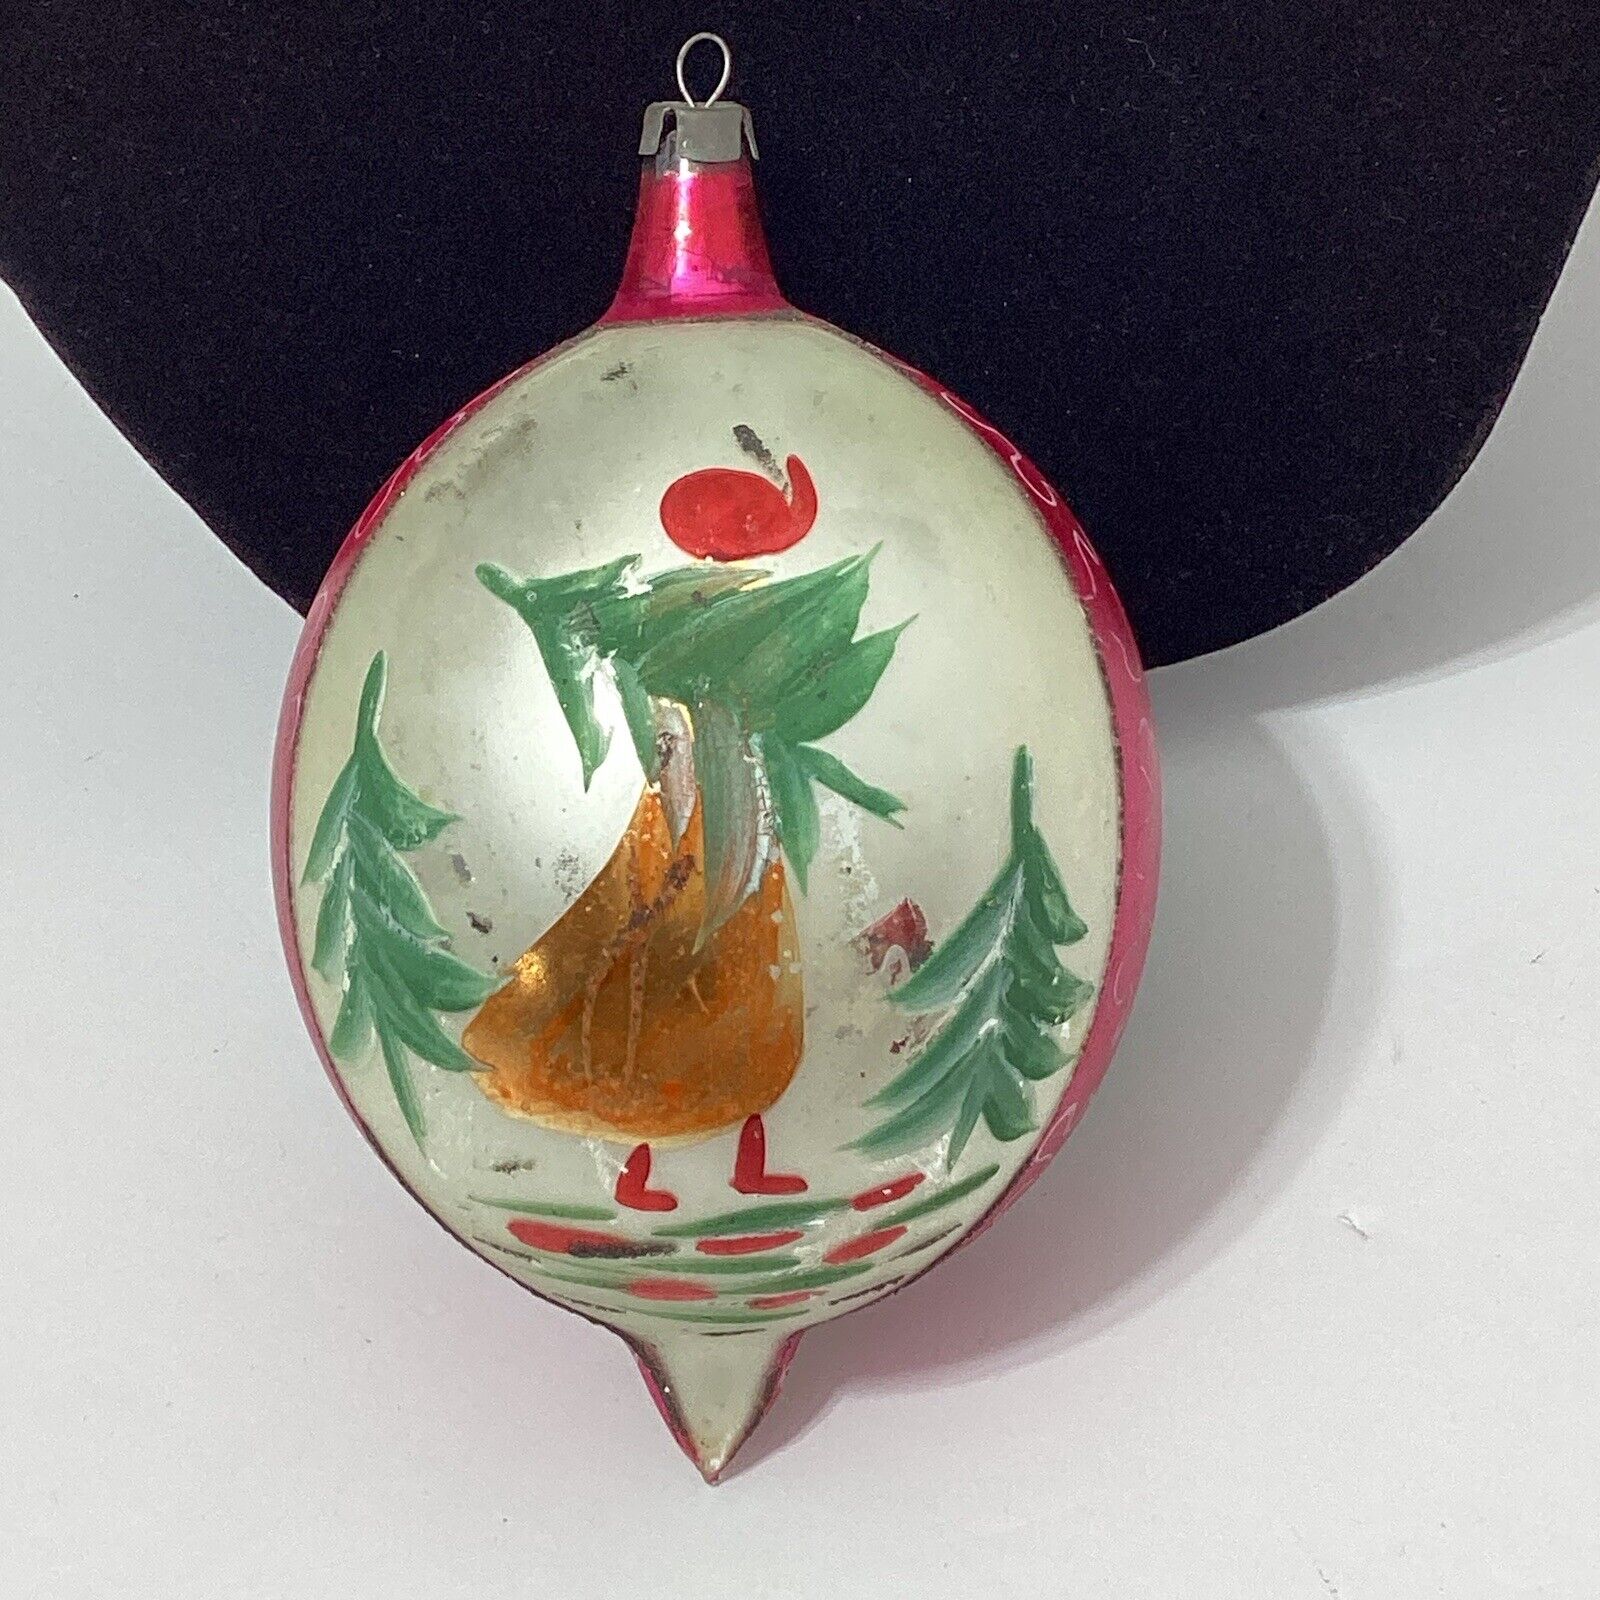 Vintage Christmas Ornament Mercury Glass Oblong Ball Large Trees Pink